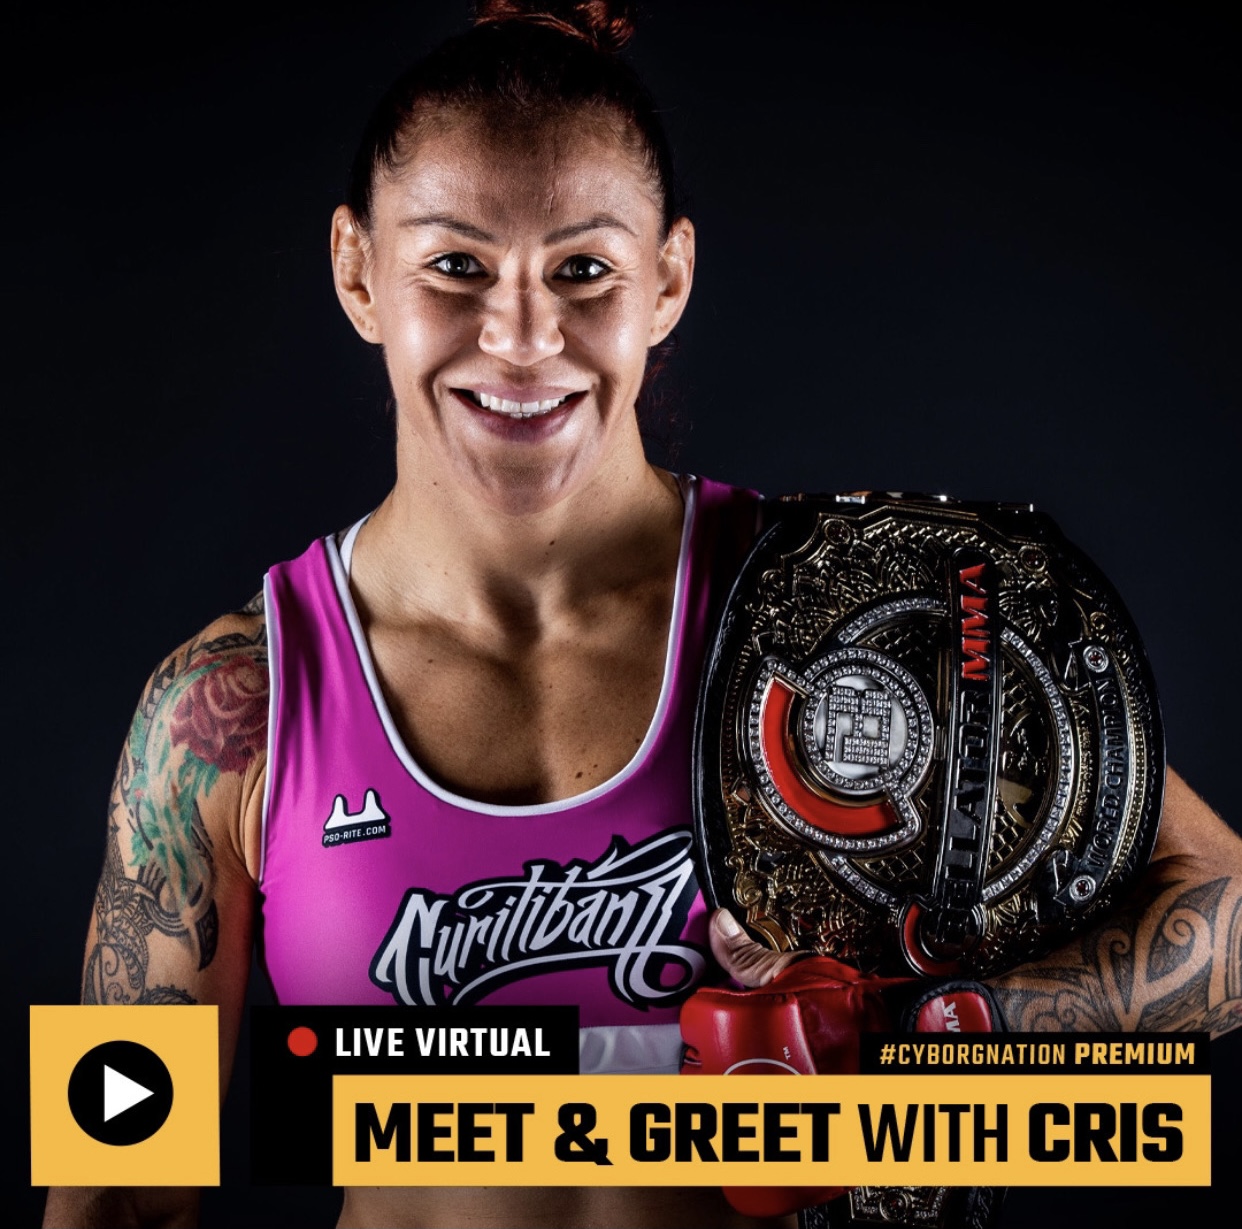 Next Cyborg Nation live QandA 1 on 1 with Cris Cyborg is scheduled